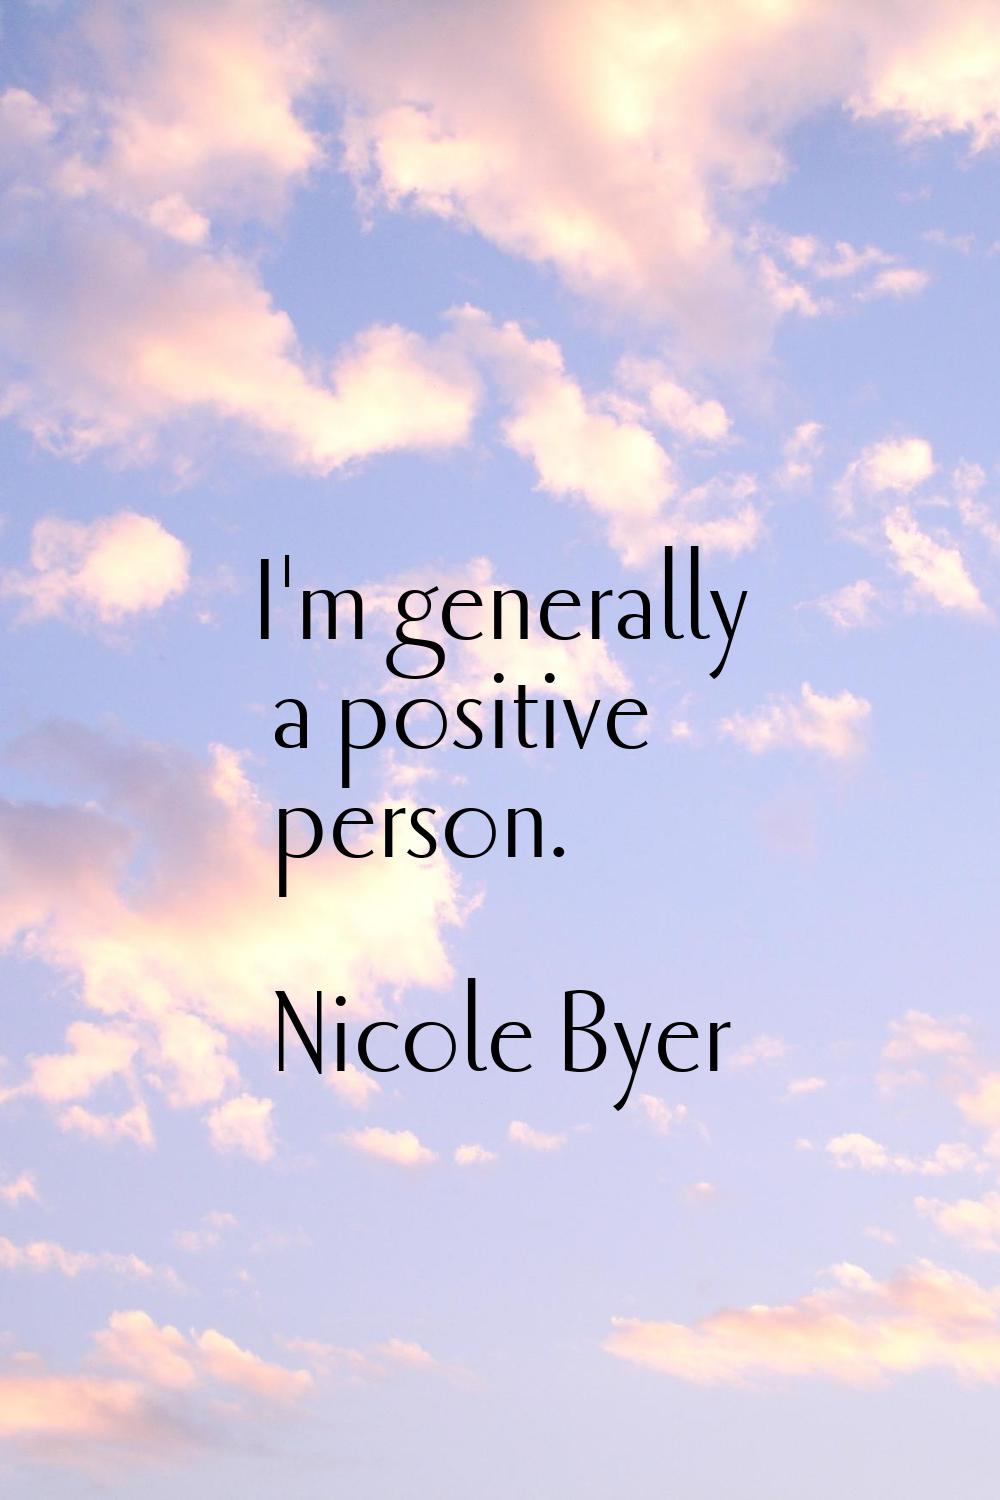 I'm generally a positive person.